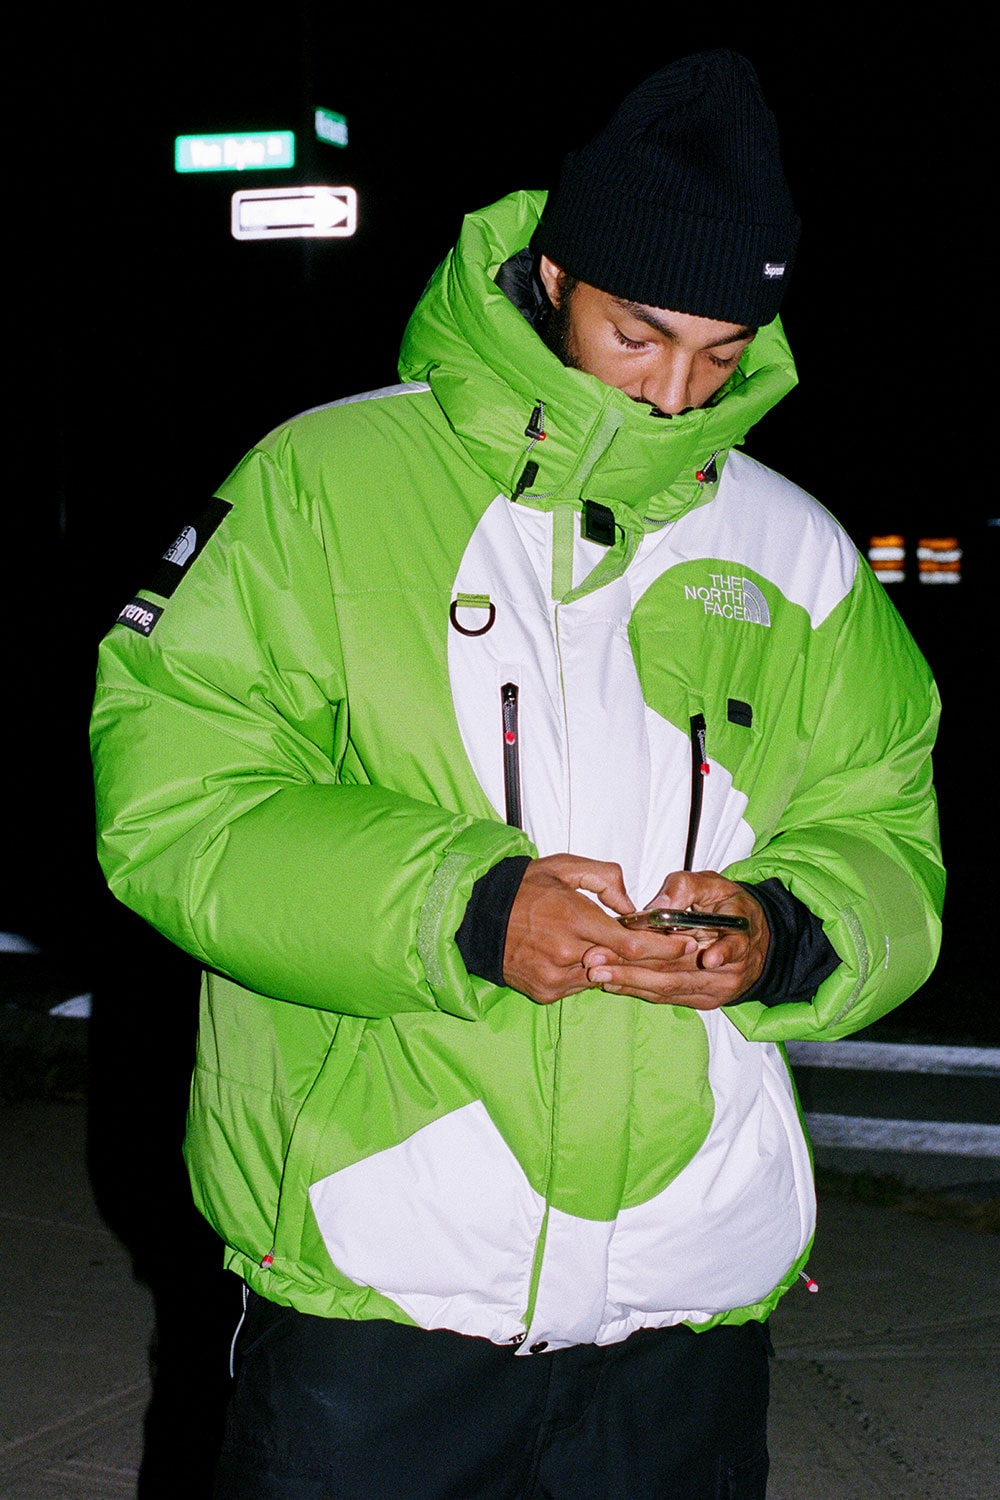 Guide to Supreme x The North Face Collection